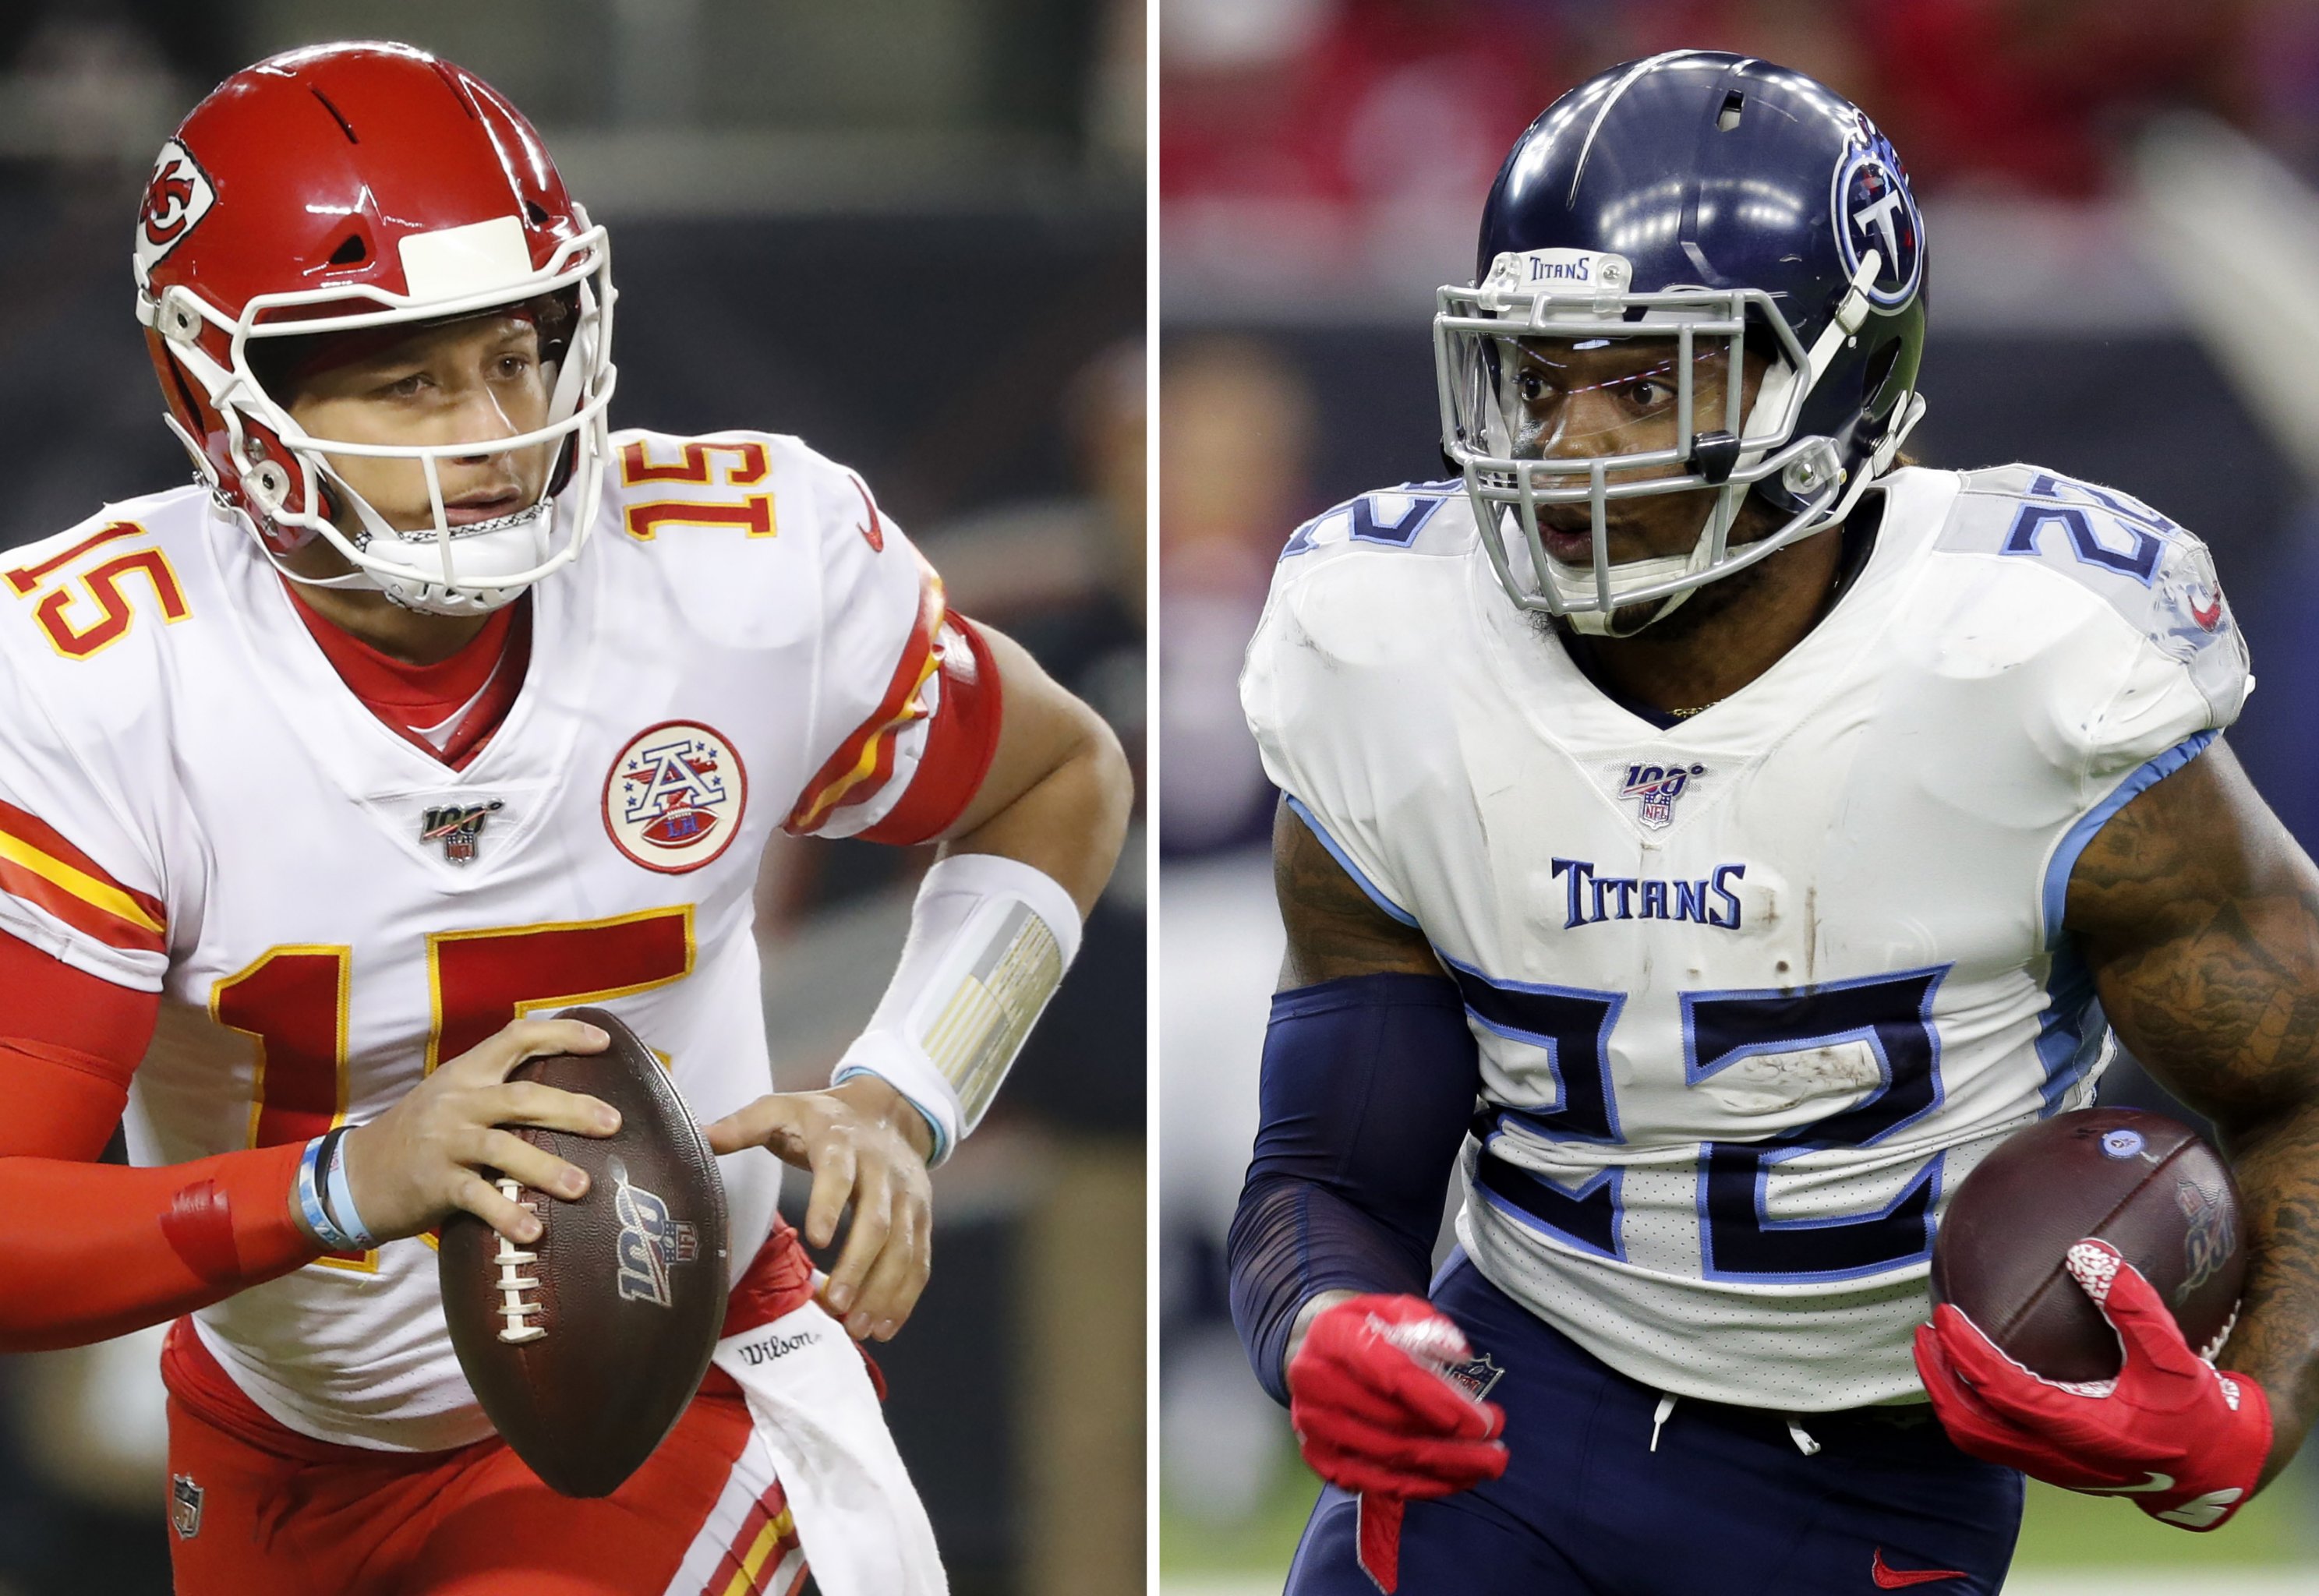 NFL Week 4: Mahomes, Chiefs withstand rally by Wilson, Jets to win